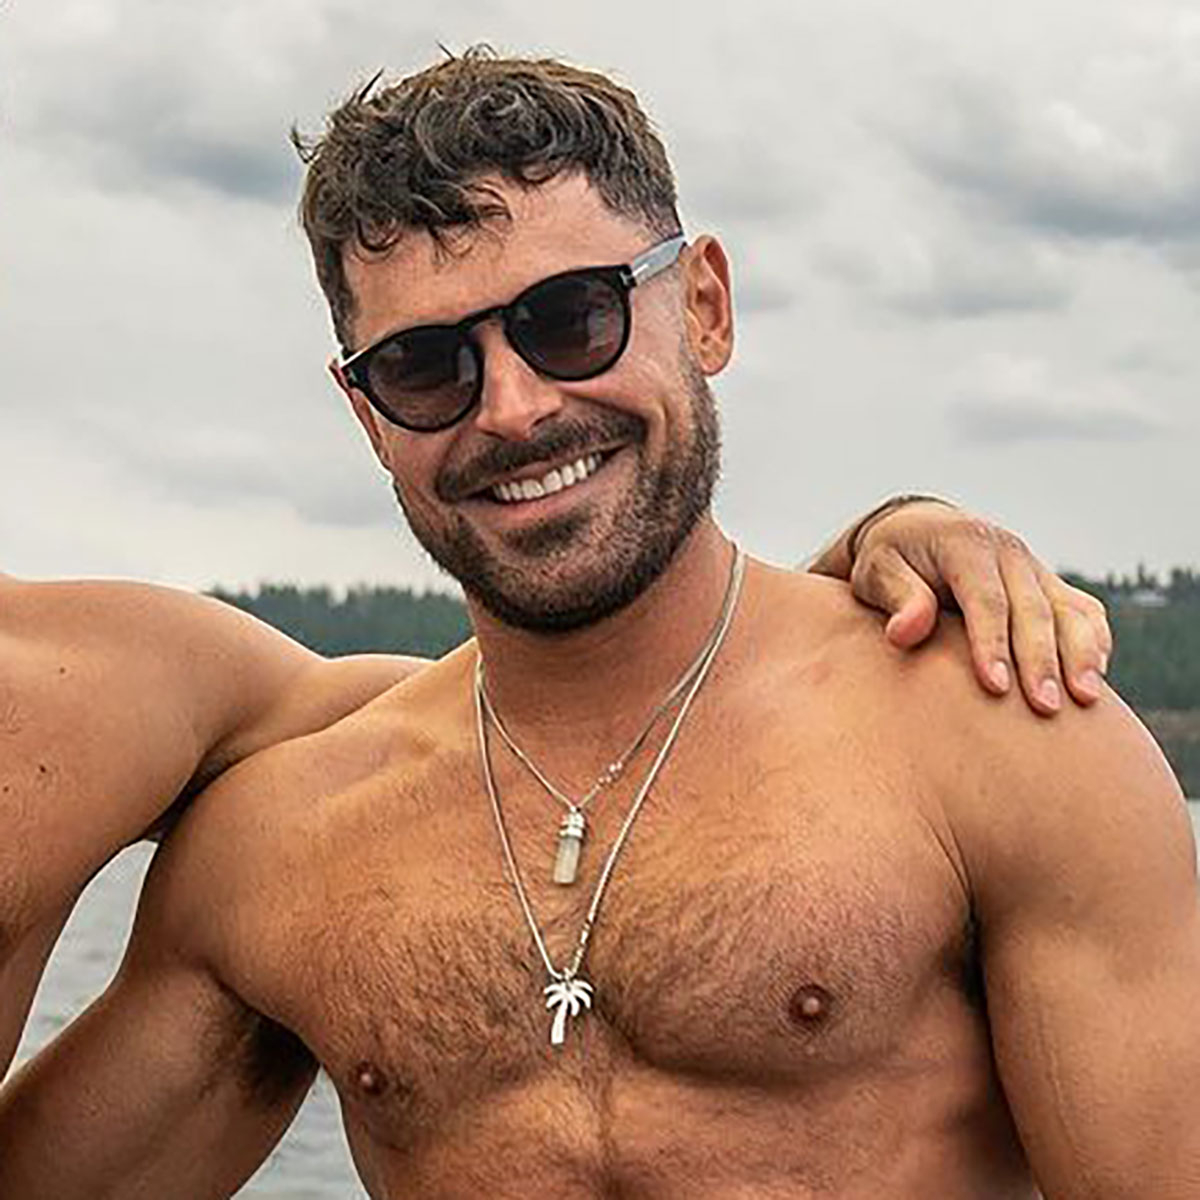 These Shirtless Photos of Zac Efron Will Heating Up Your Timeline